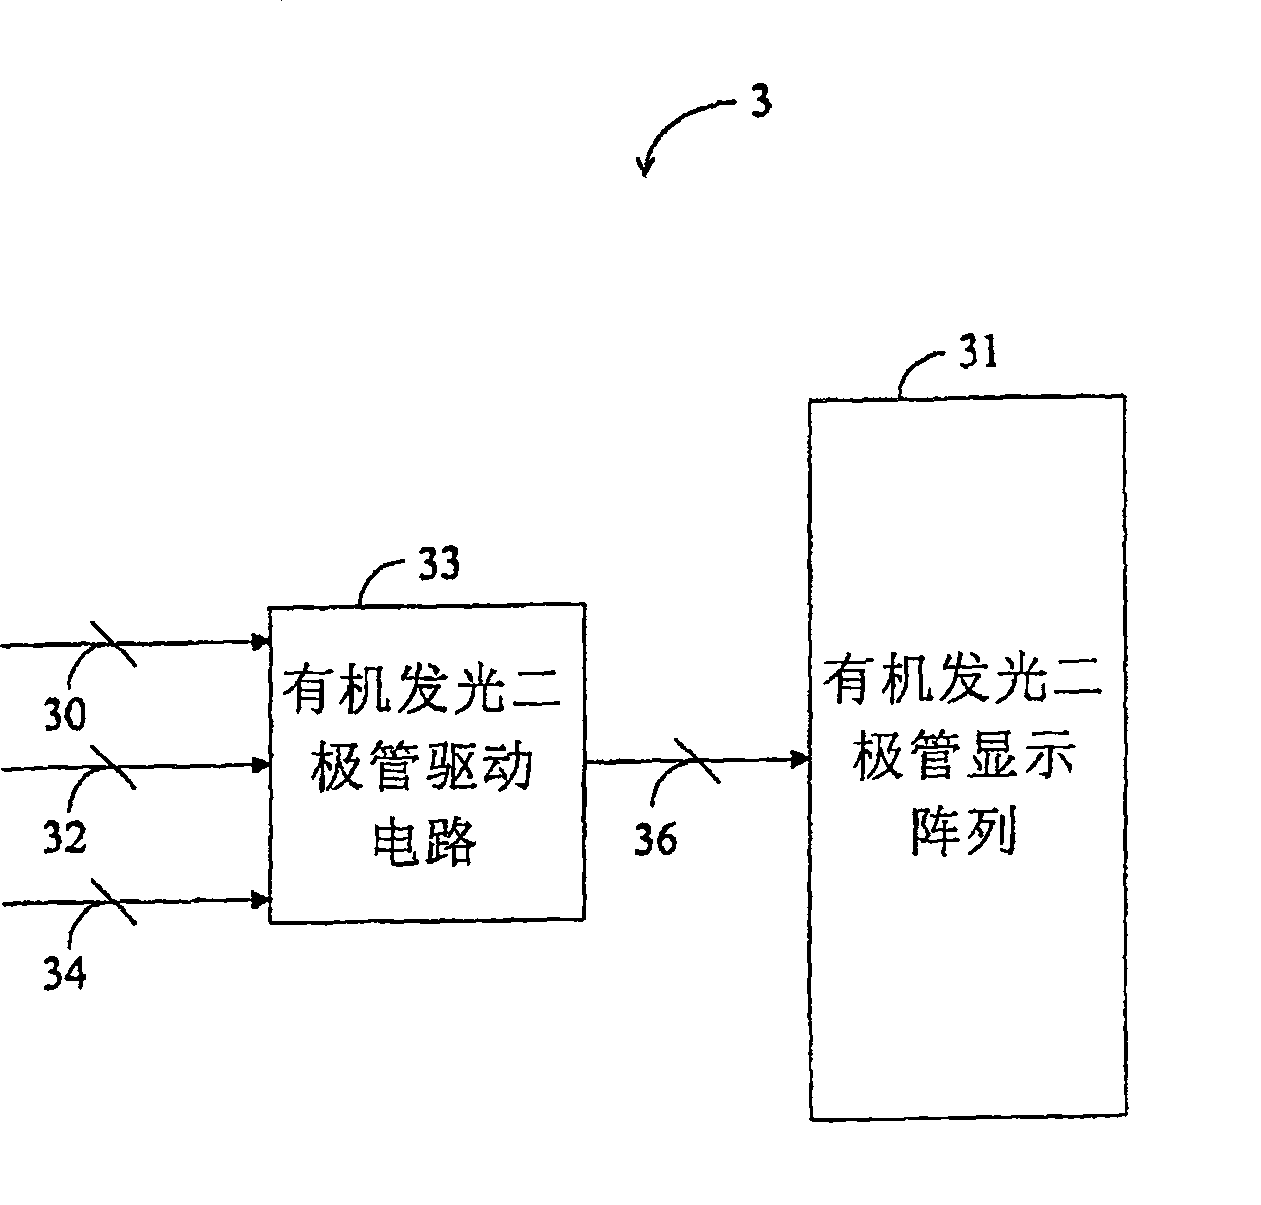 Driving circuit, display device and method for adjusting the picture update rate